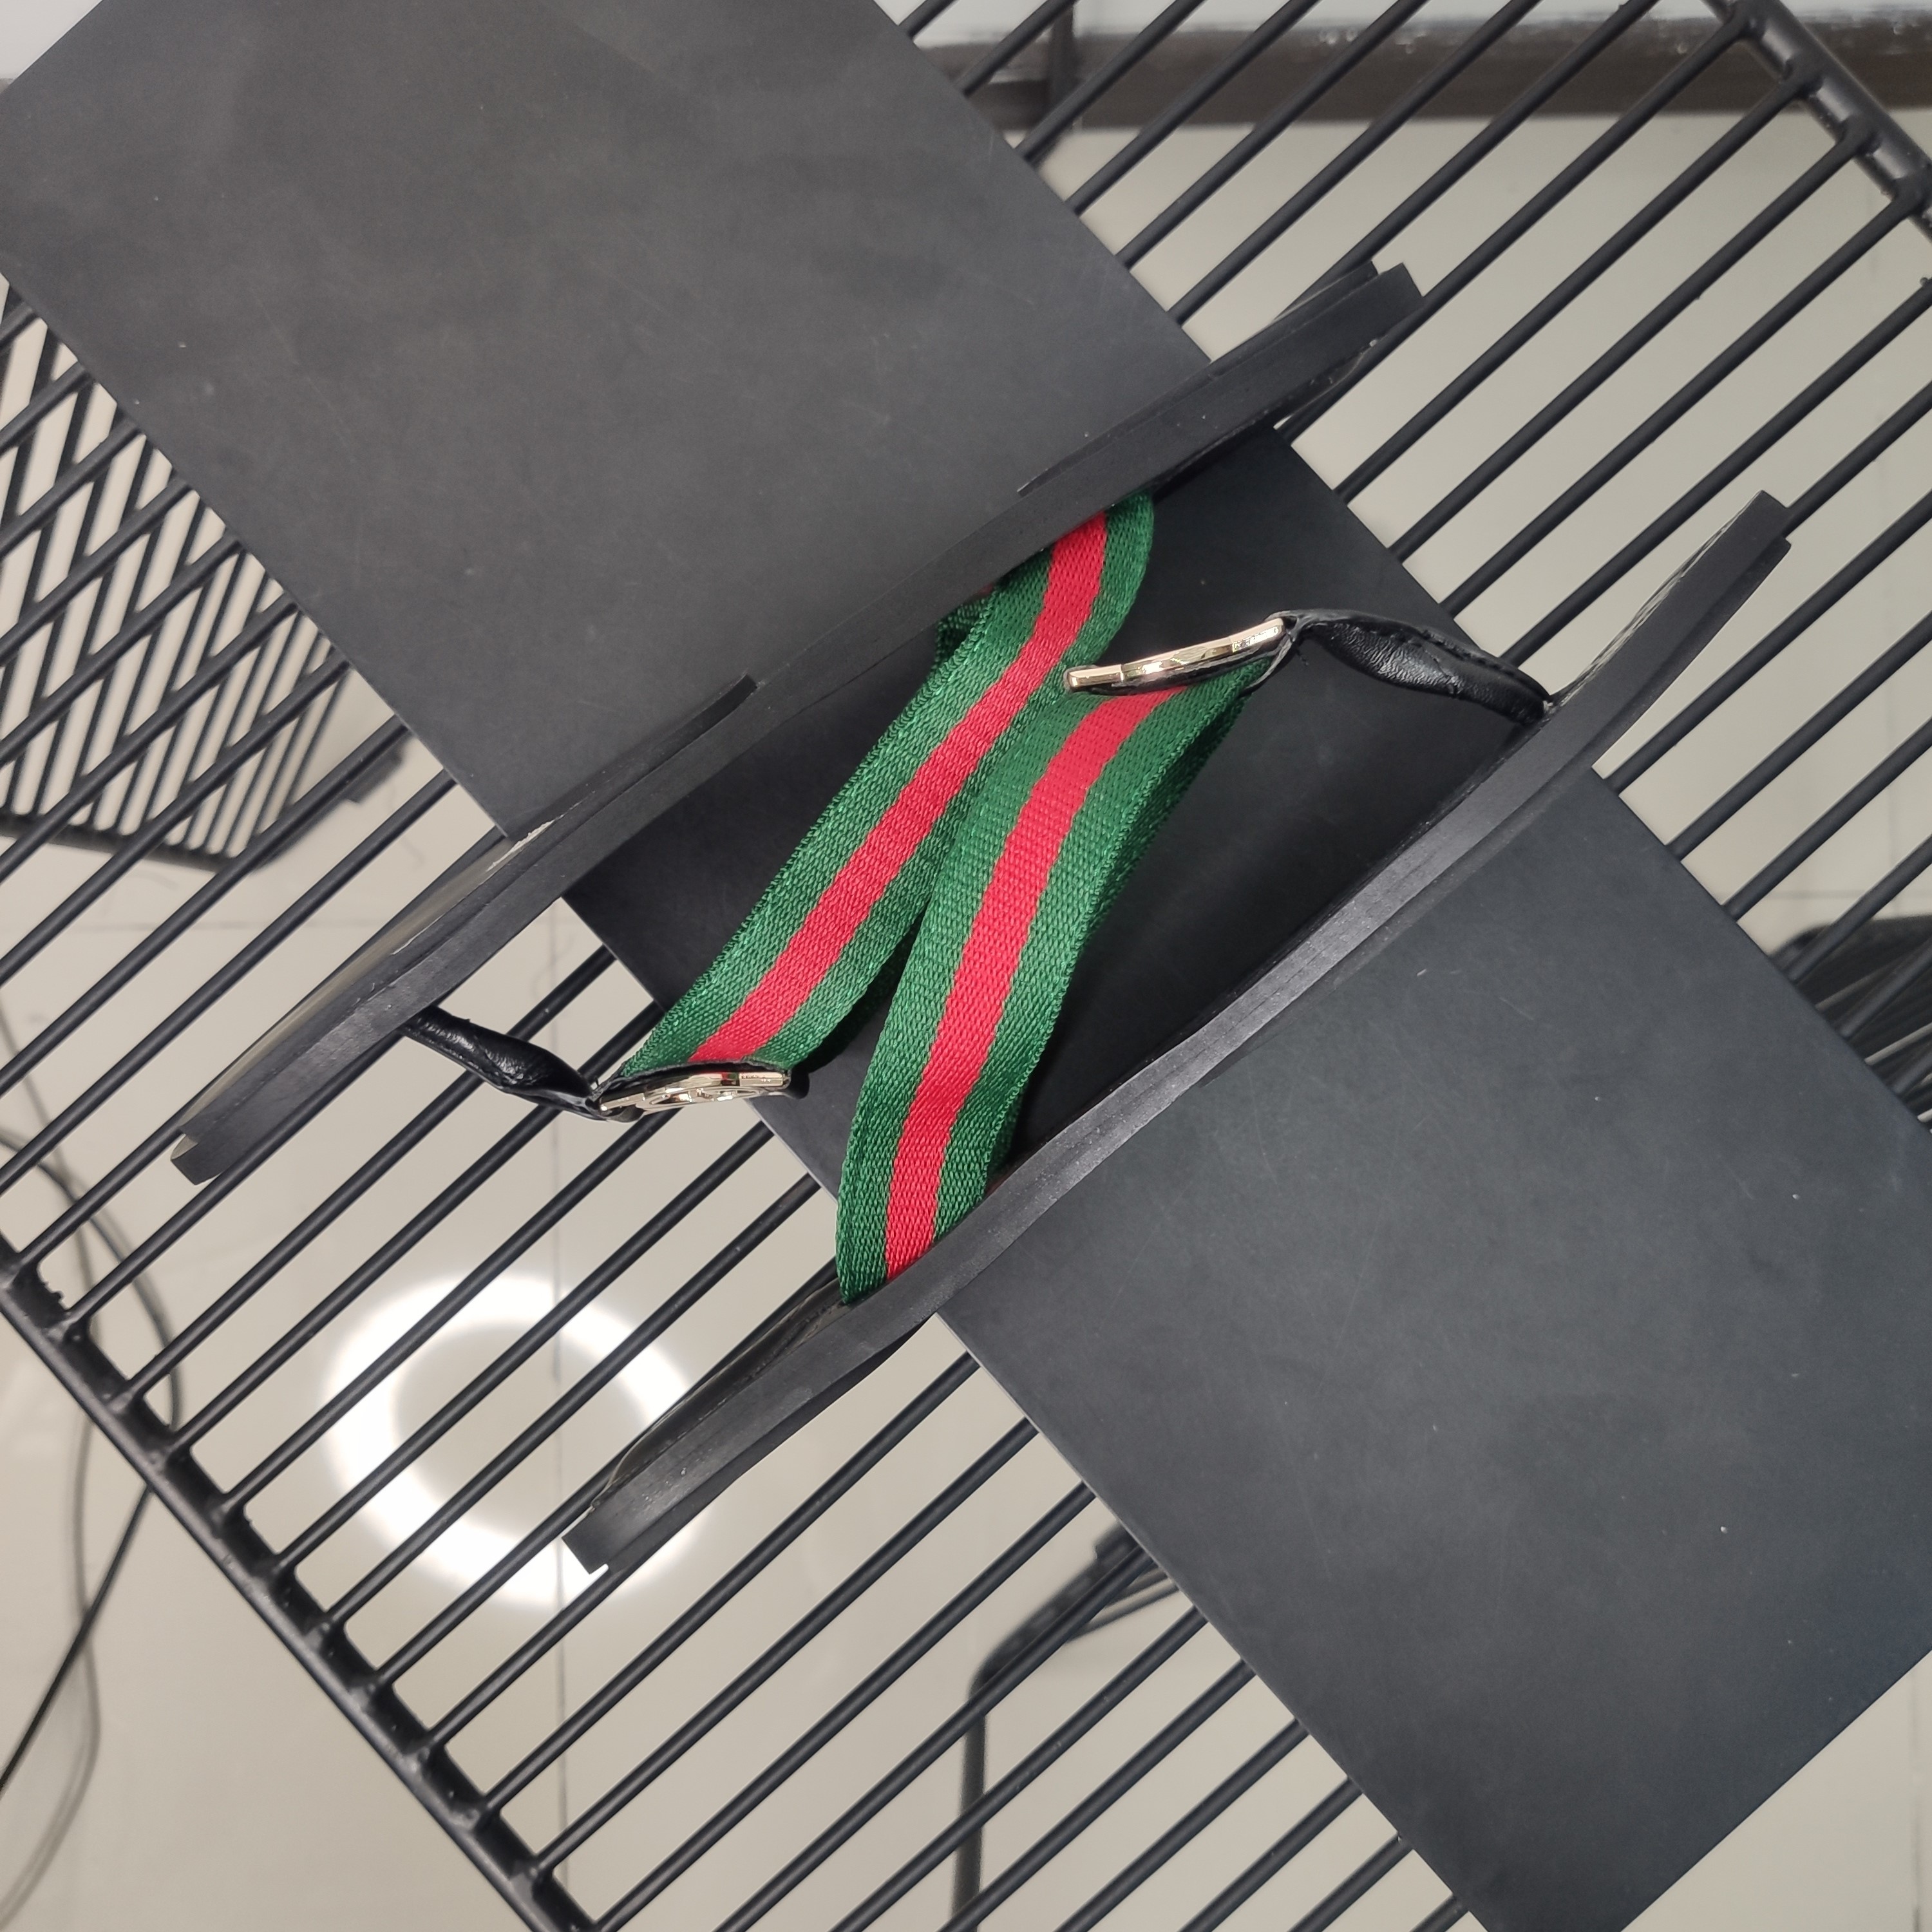 High Quality Gucci Web strap thong sandal Green and red Web nylon strap with black leather detail OF_DC210557A449